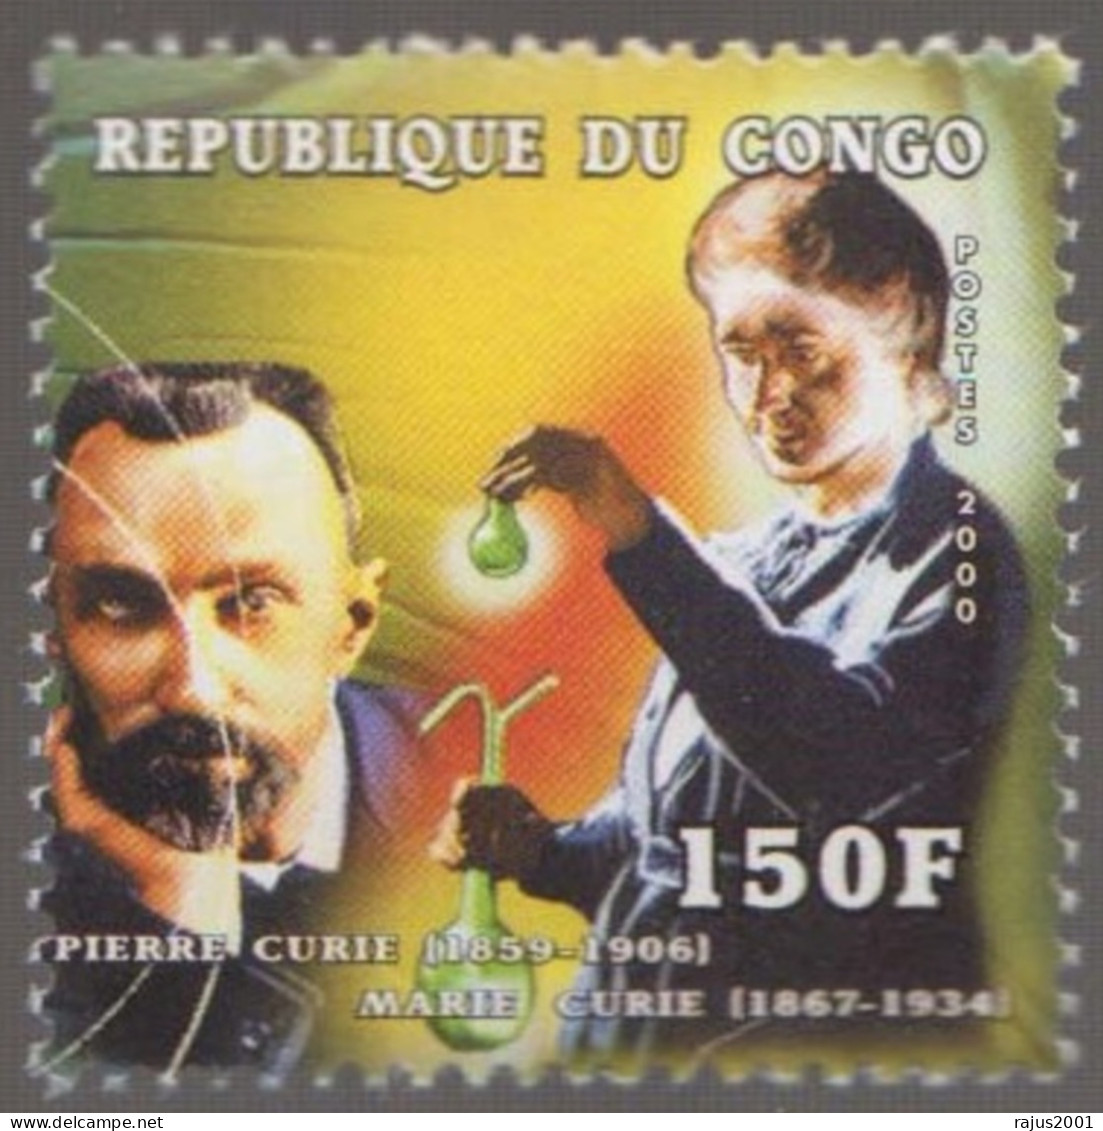 Pierre And Marie Curie, Discovery Of Radium And Polonium Nobel Prize Cancer Disease Chemistry Physics MNH Congo - Chimie